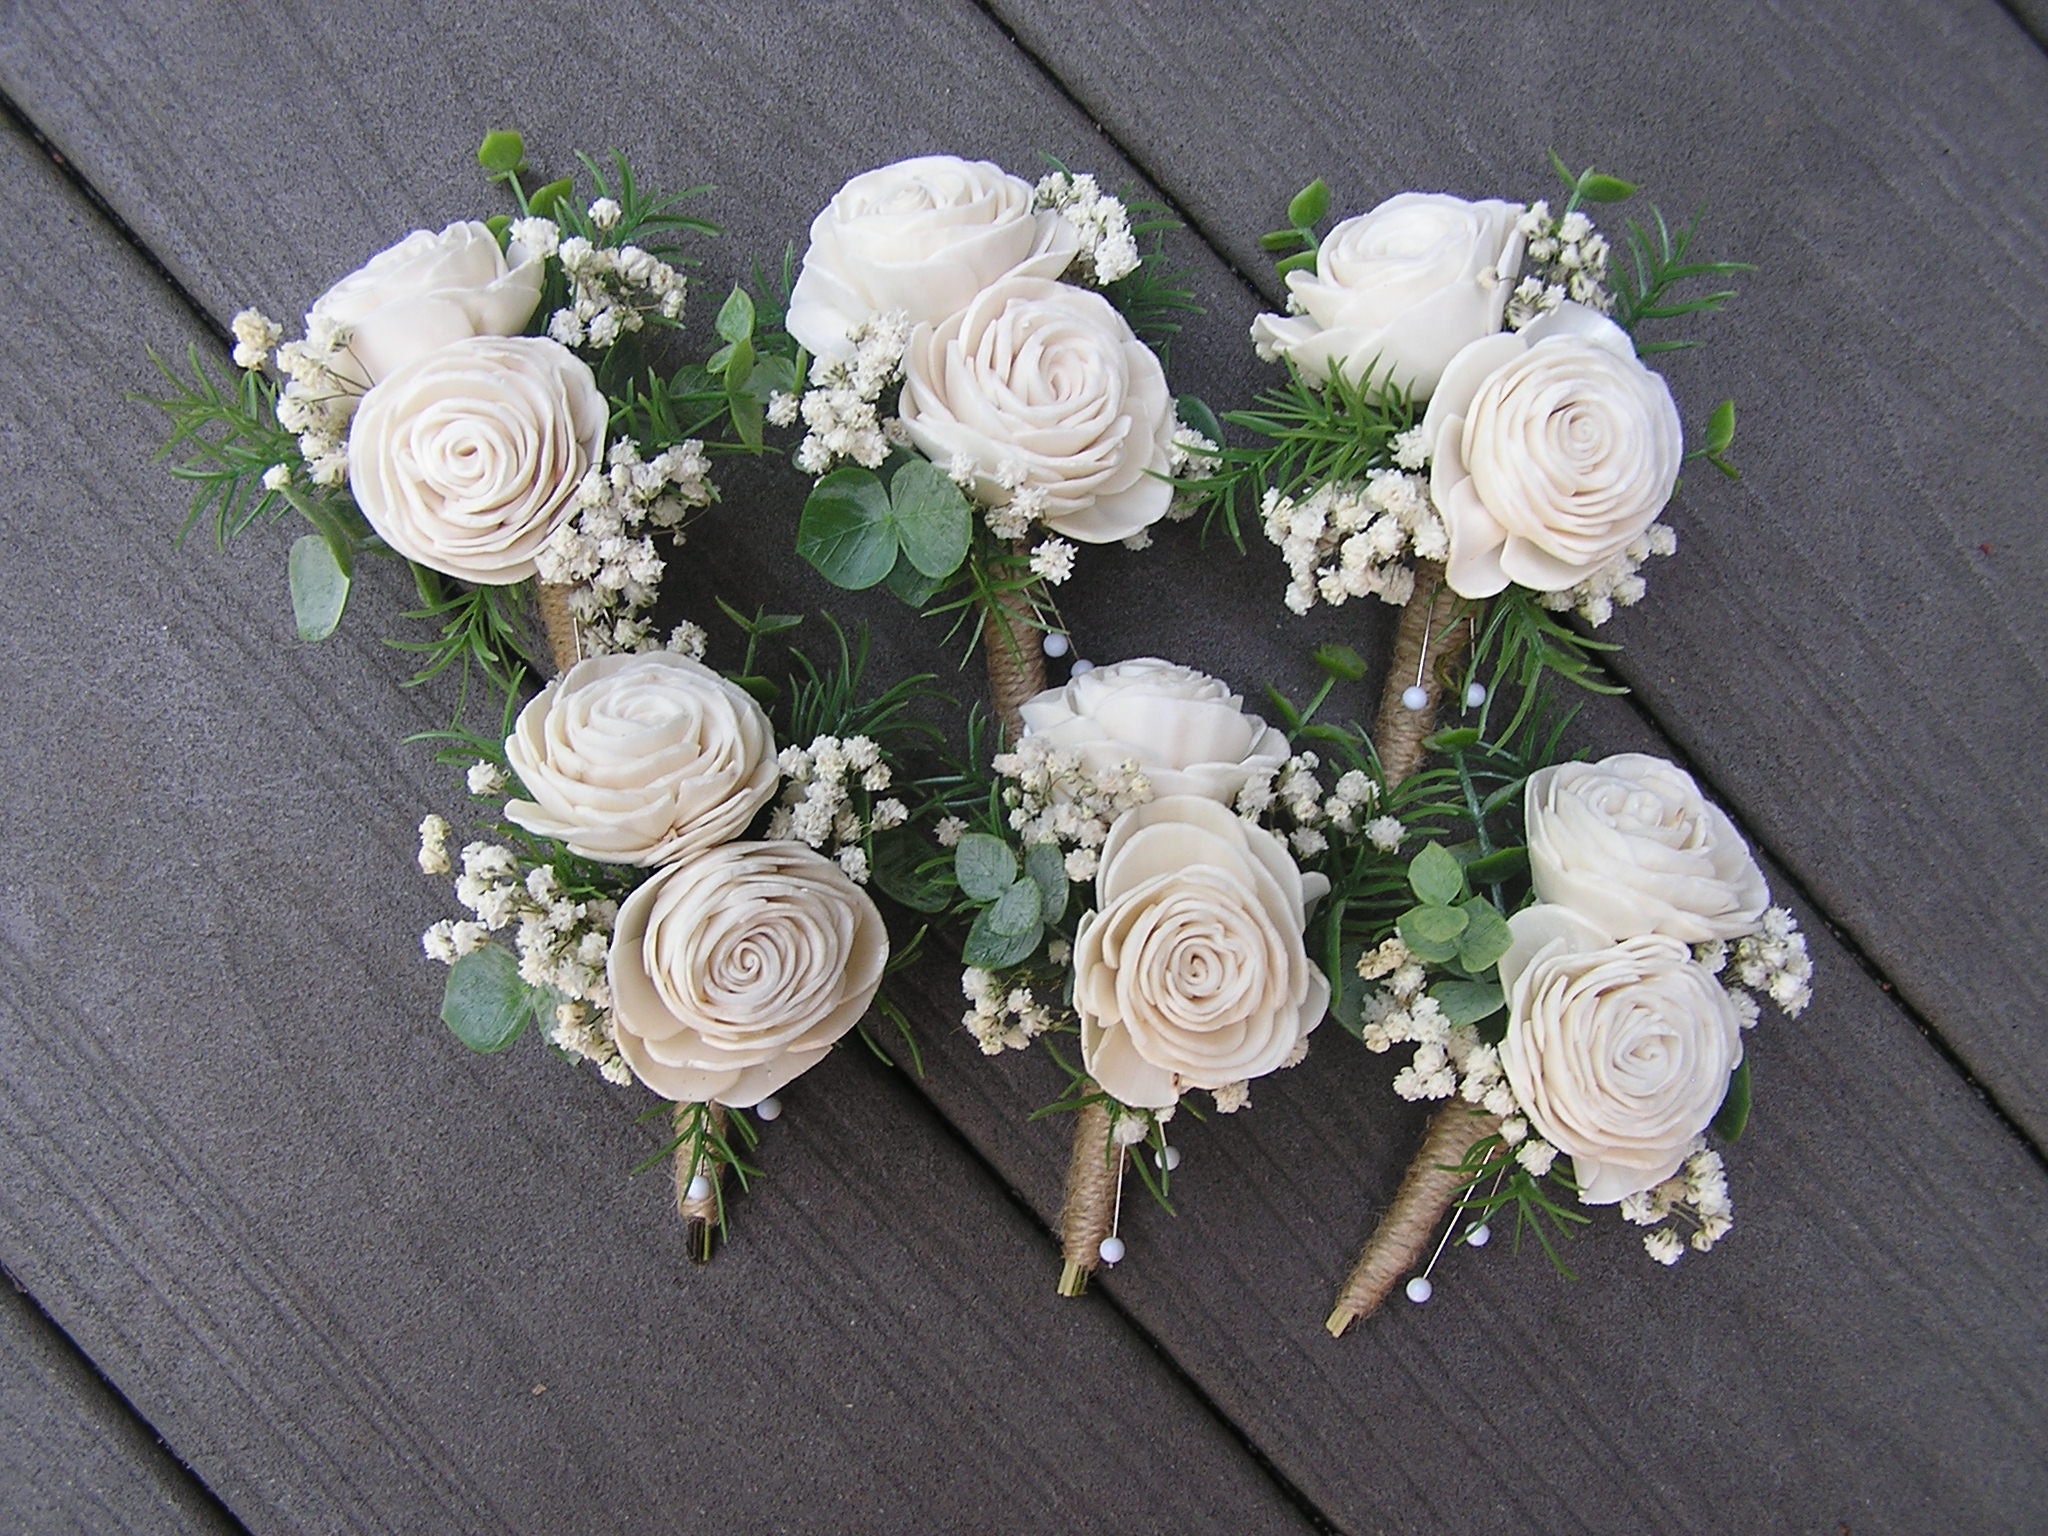 10 Oasis Wedding Corsage Clips for Weddings Buttonhole Flowers Corsage Pins SB63 